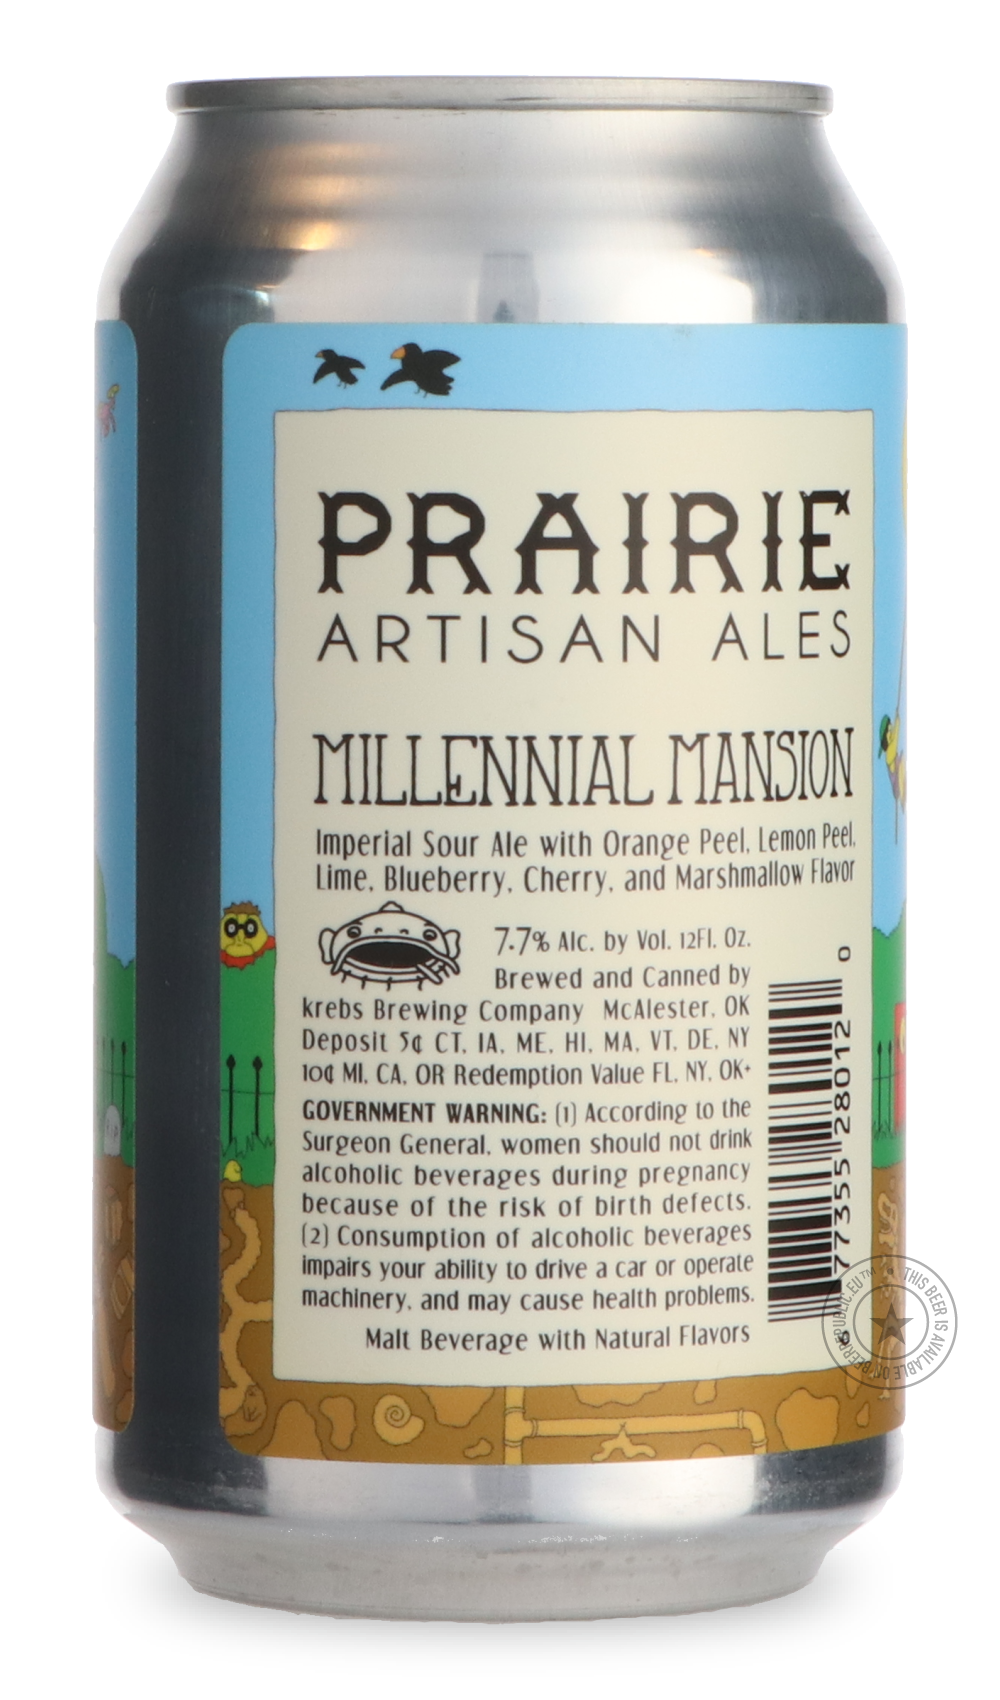 -Prairie- Millennial Mansion-Sour / Wild & Fruity- Only @ Beer Republic - The best online beer store for American & Canadian craft beer - Buy beer online from the USA and Canada - Bier online kopen - Amerikaans bier kopen - Craft beer store - Craft beer kopen - Amerikanisch bier kaufen - Bier online kaufen - Acheter biere online - IPA - Stout - Porter - New England IPA - Hazy IPA - Imperial Stout - Barrel Aged - Barrel Aged Imperial Stout - Brown - Dark beer - Blond - Blonde - Pilsner - Lager - Wheat - Weiz